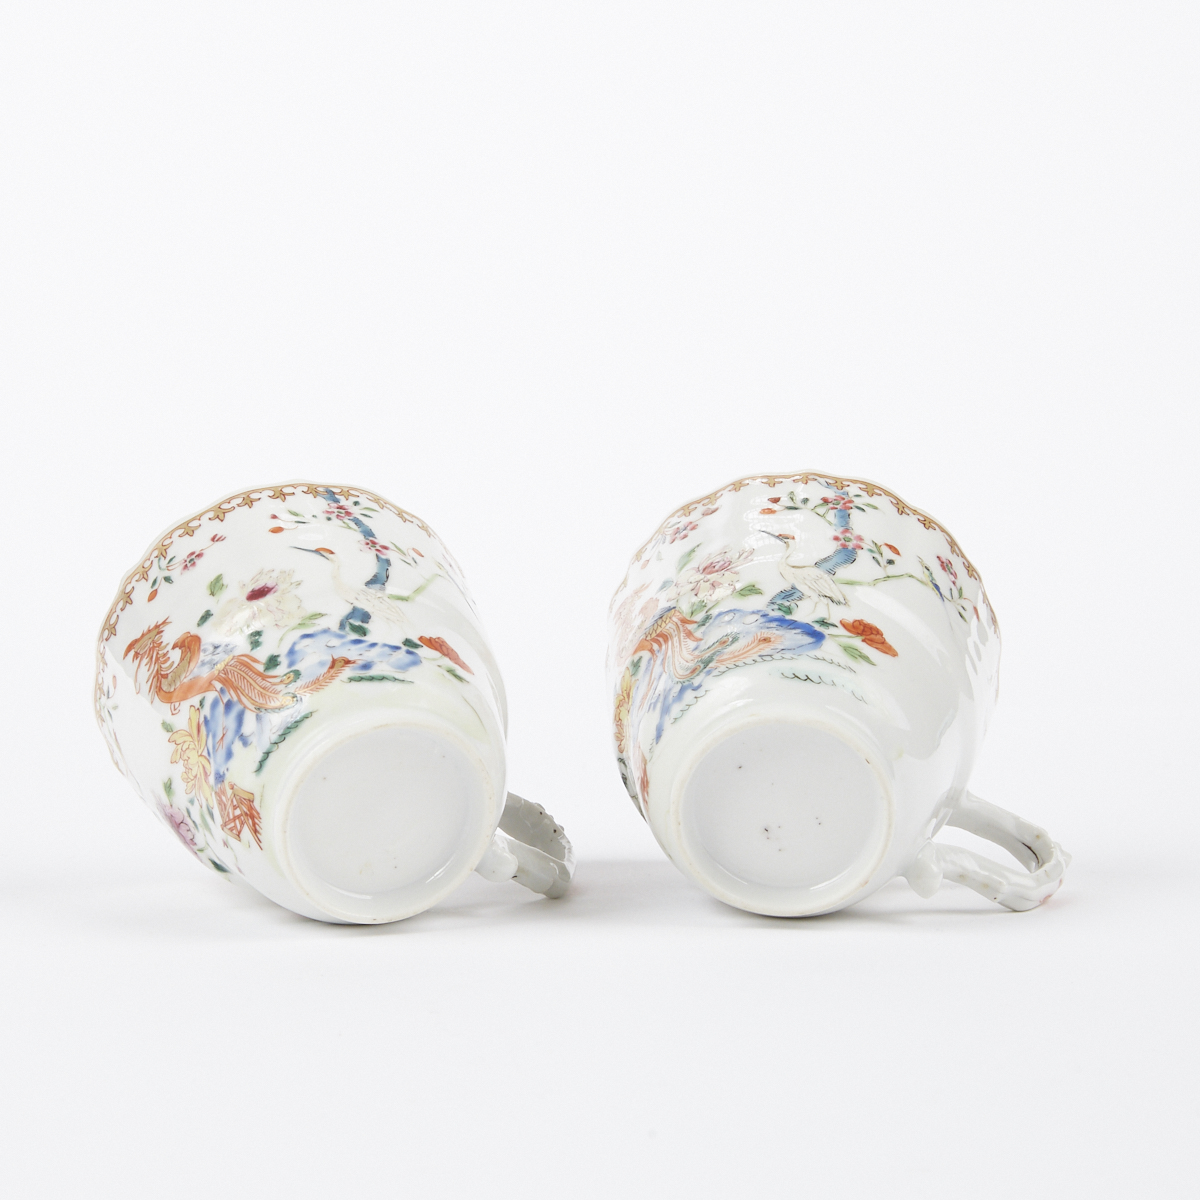 Pair of 18th c. Chinese Porcelain Famille Rose Teacups - Image 5 of 5